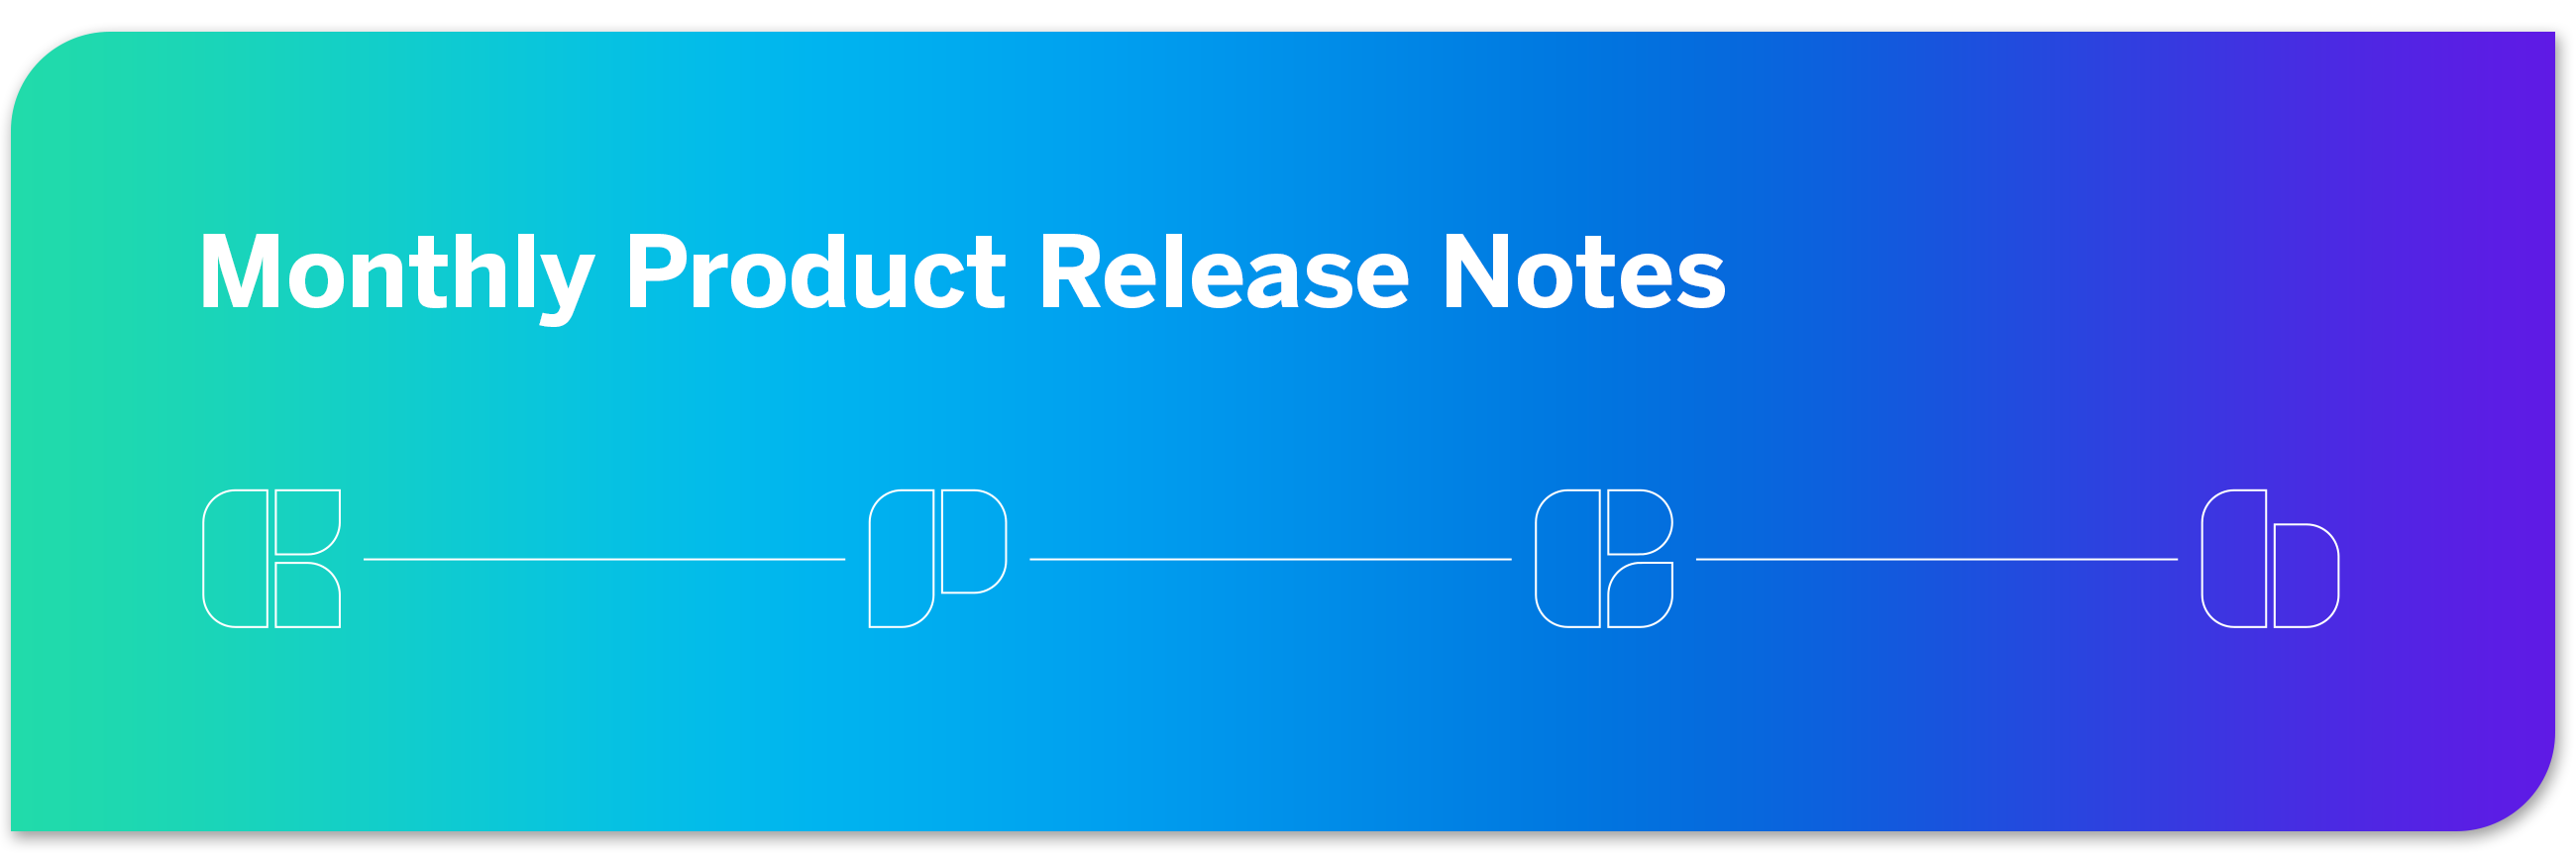 Monthly Product Release Notes Header